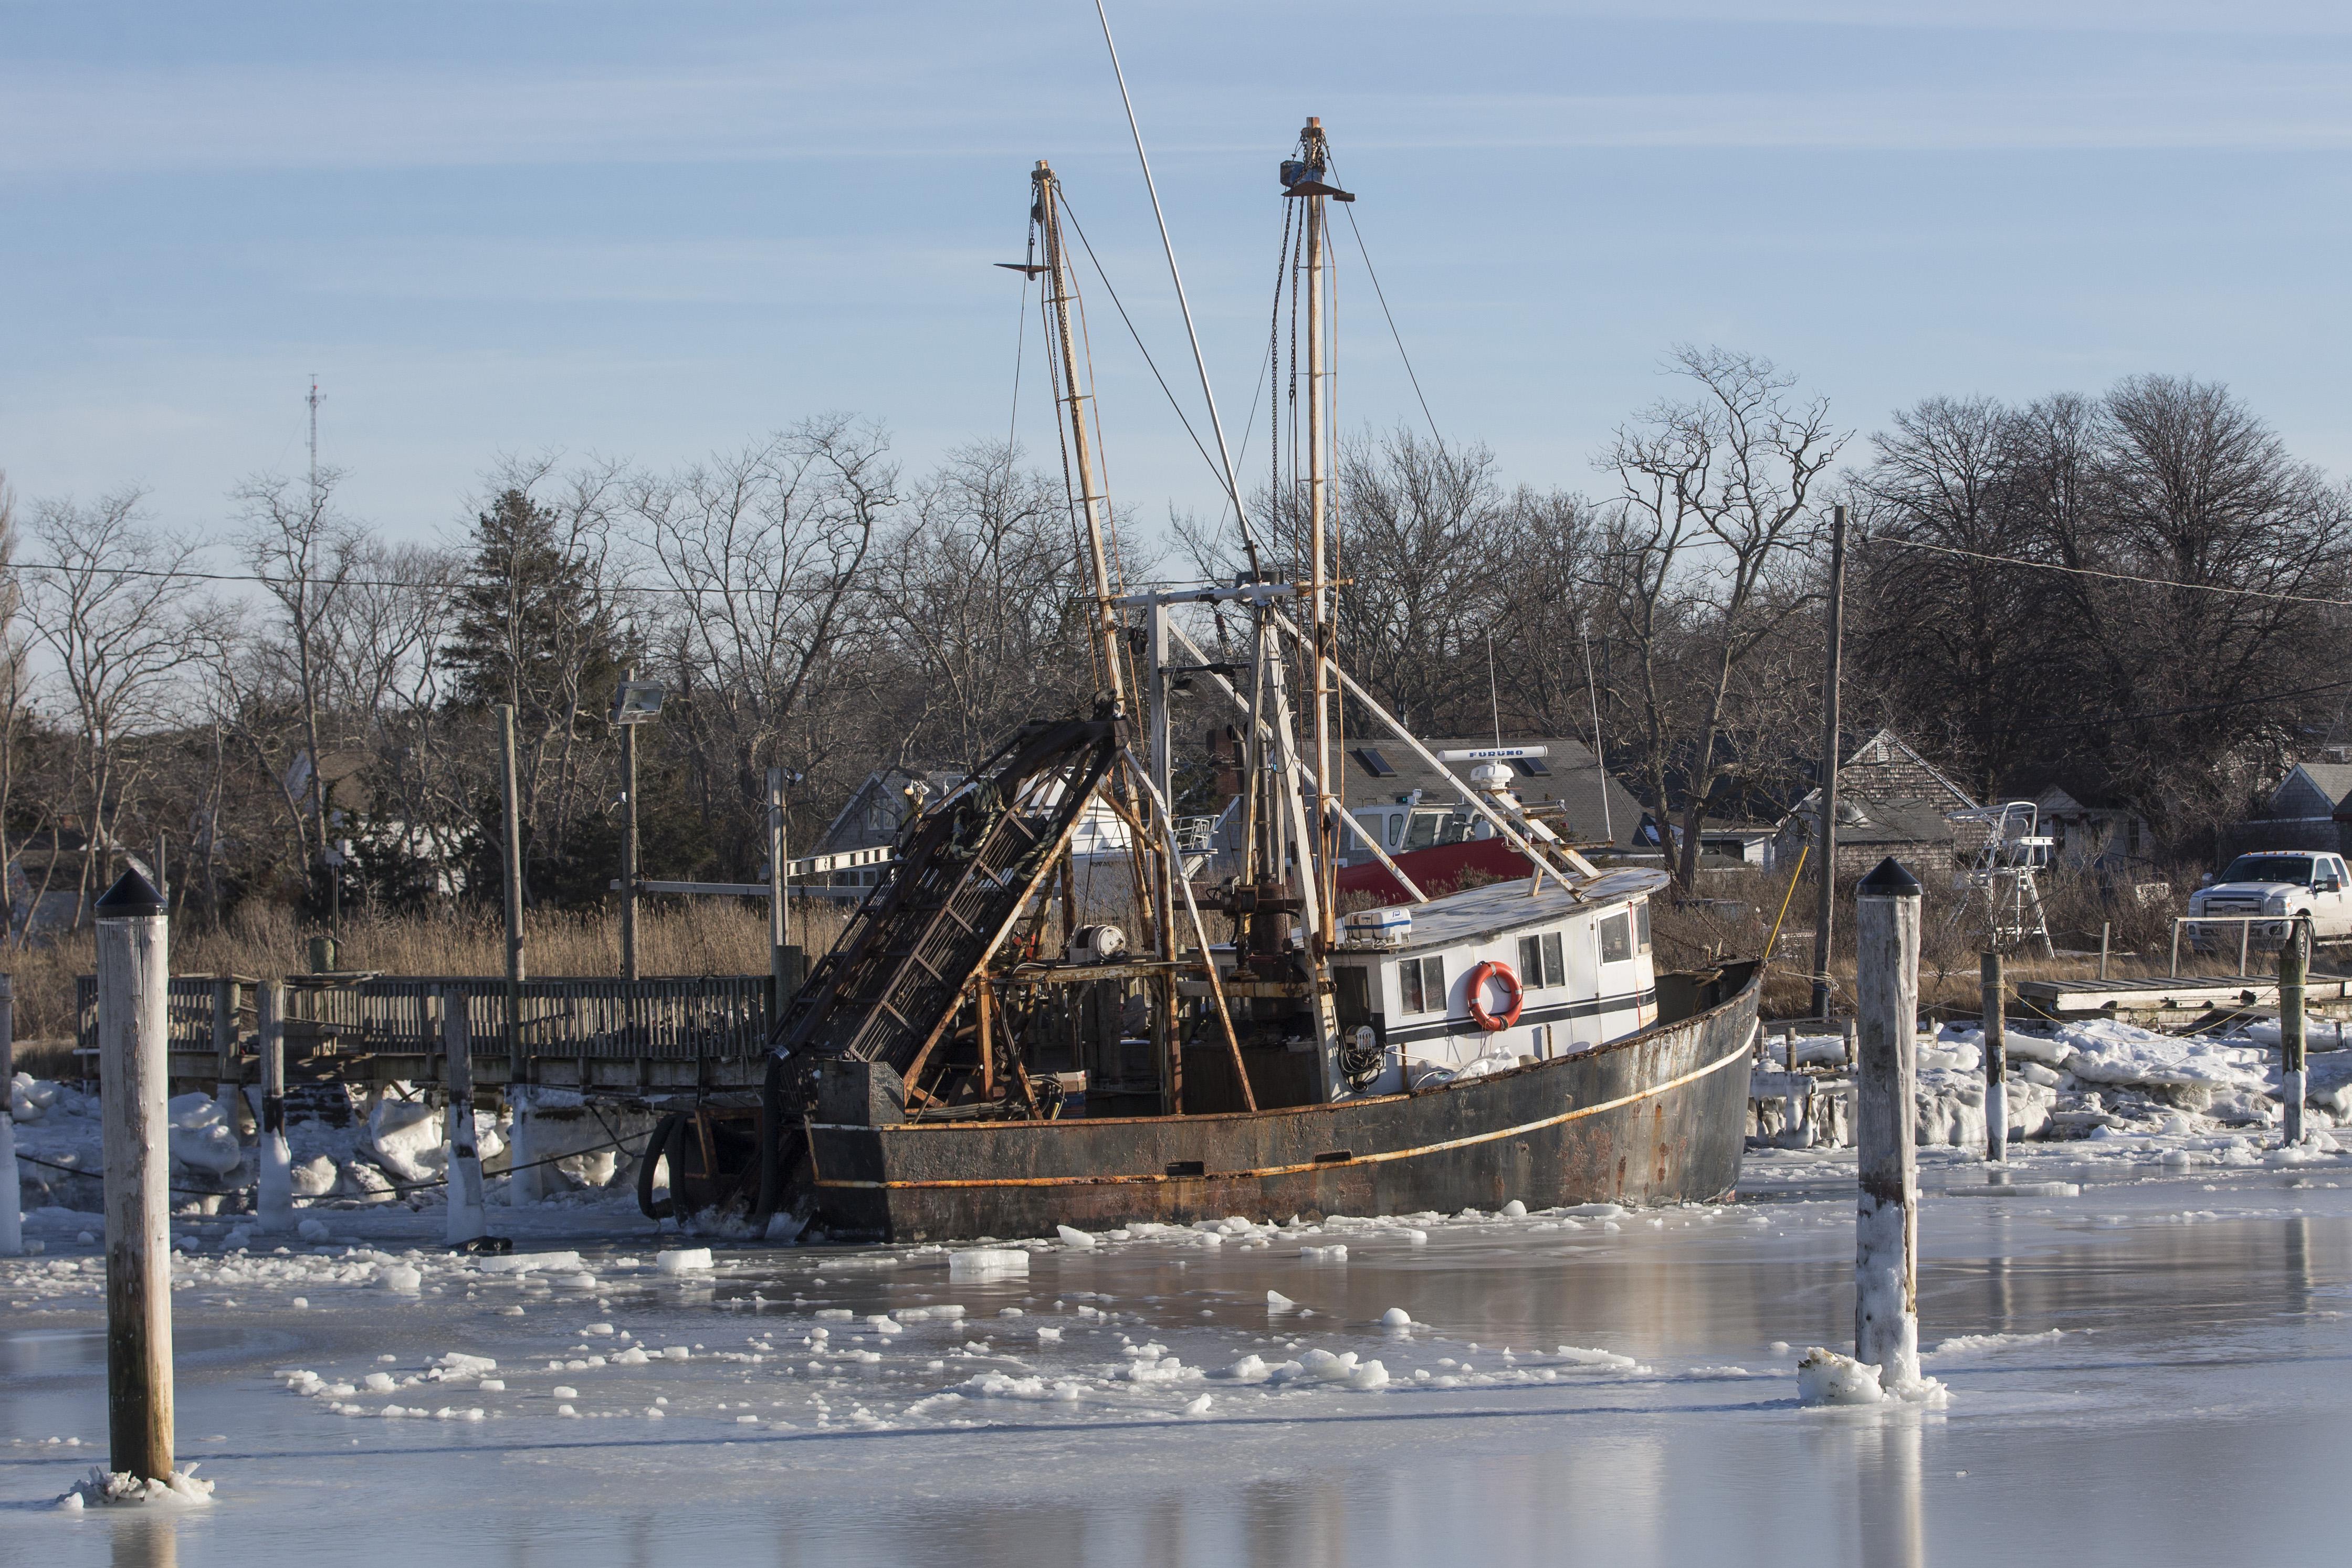 ORLEANS, MA - JANUARY 03:   Sea ice surrounds a boat in Rock Harbor on January 3, 2018 in Orleans, Massachusetts, A winter storm is hitting the east coast from Florida to New England bringing snow and frigid temperatures. (Photo by Scott Eisen/Getty Images)